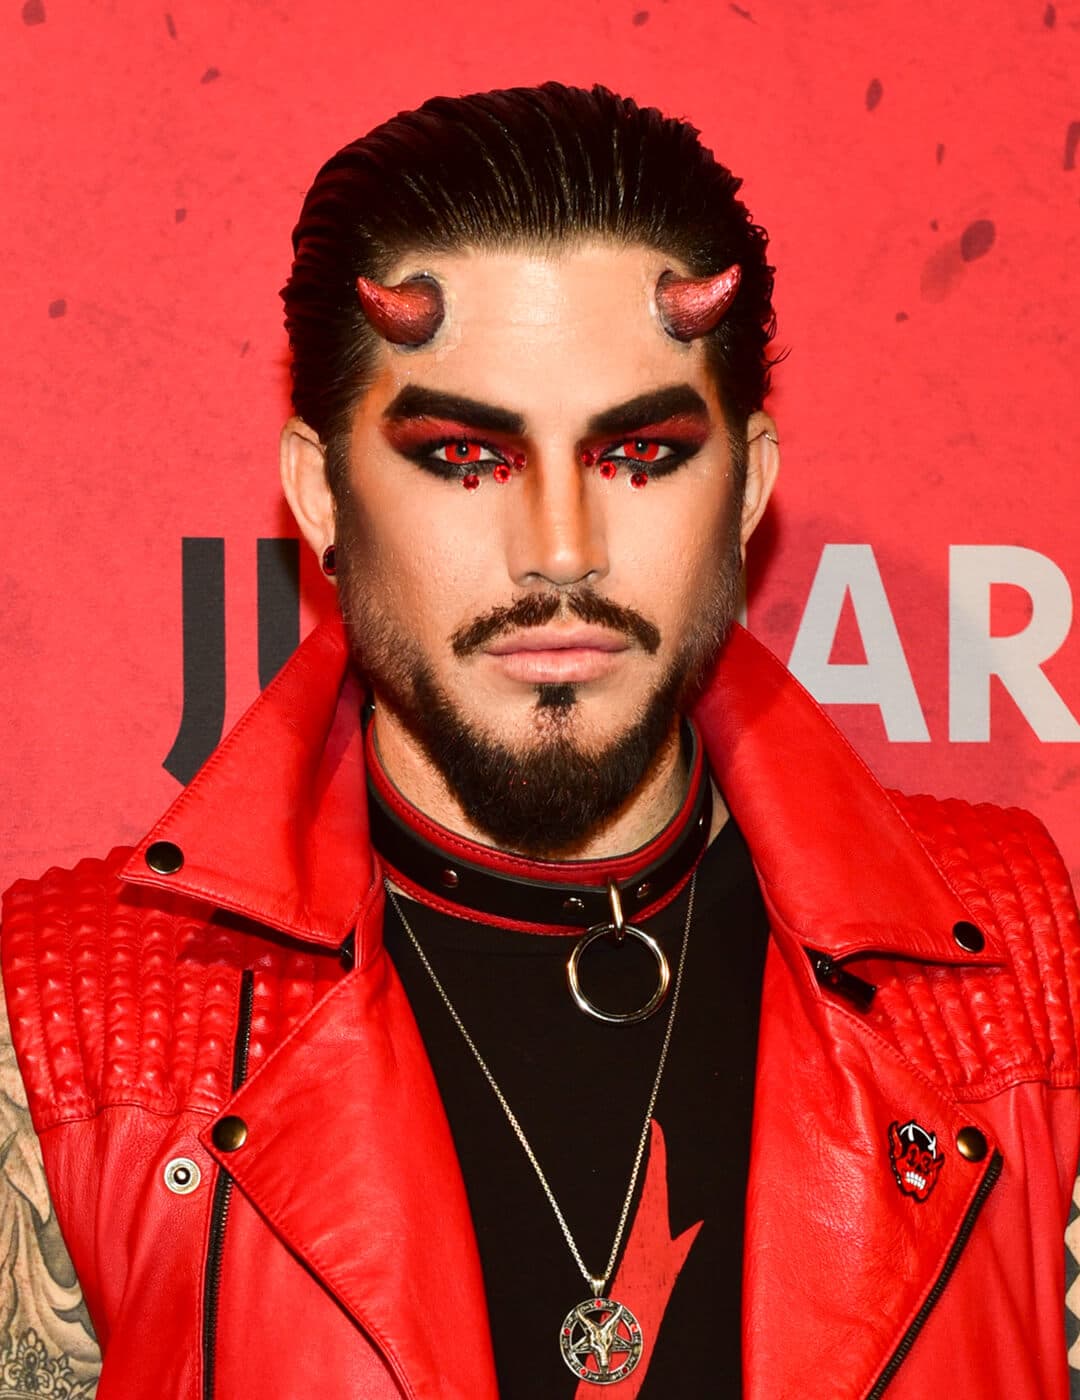 Adam Lambert dressed up as a rock star devil in red leather sleeveless jacket with matching horns